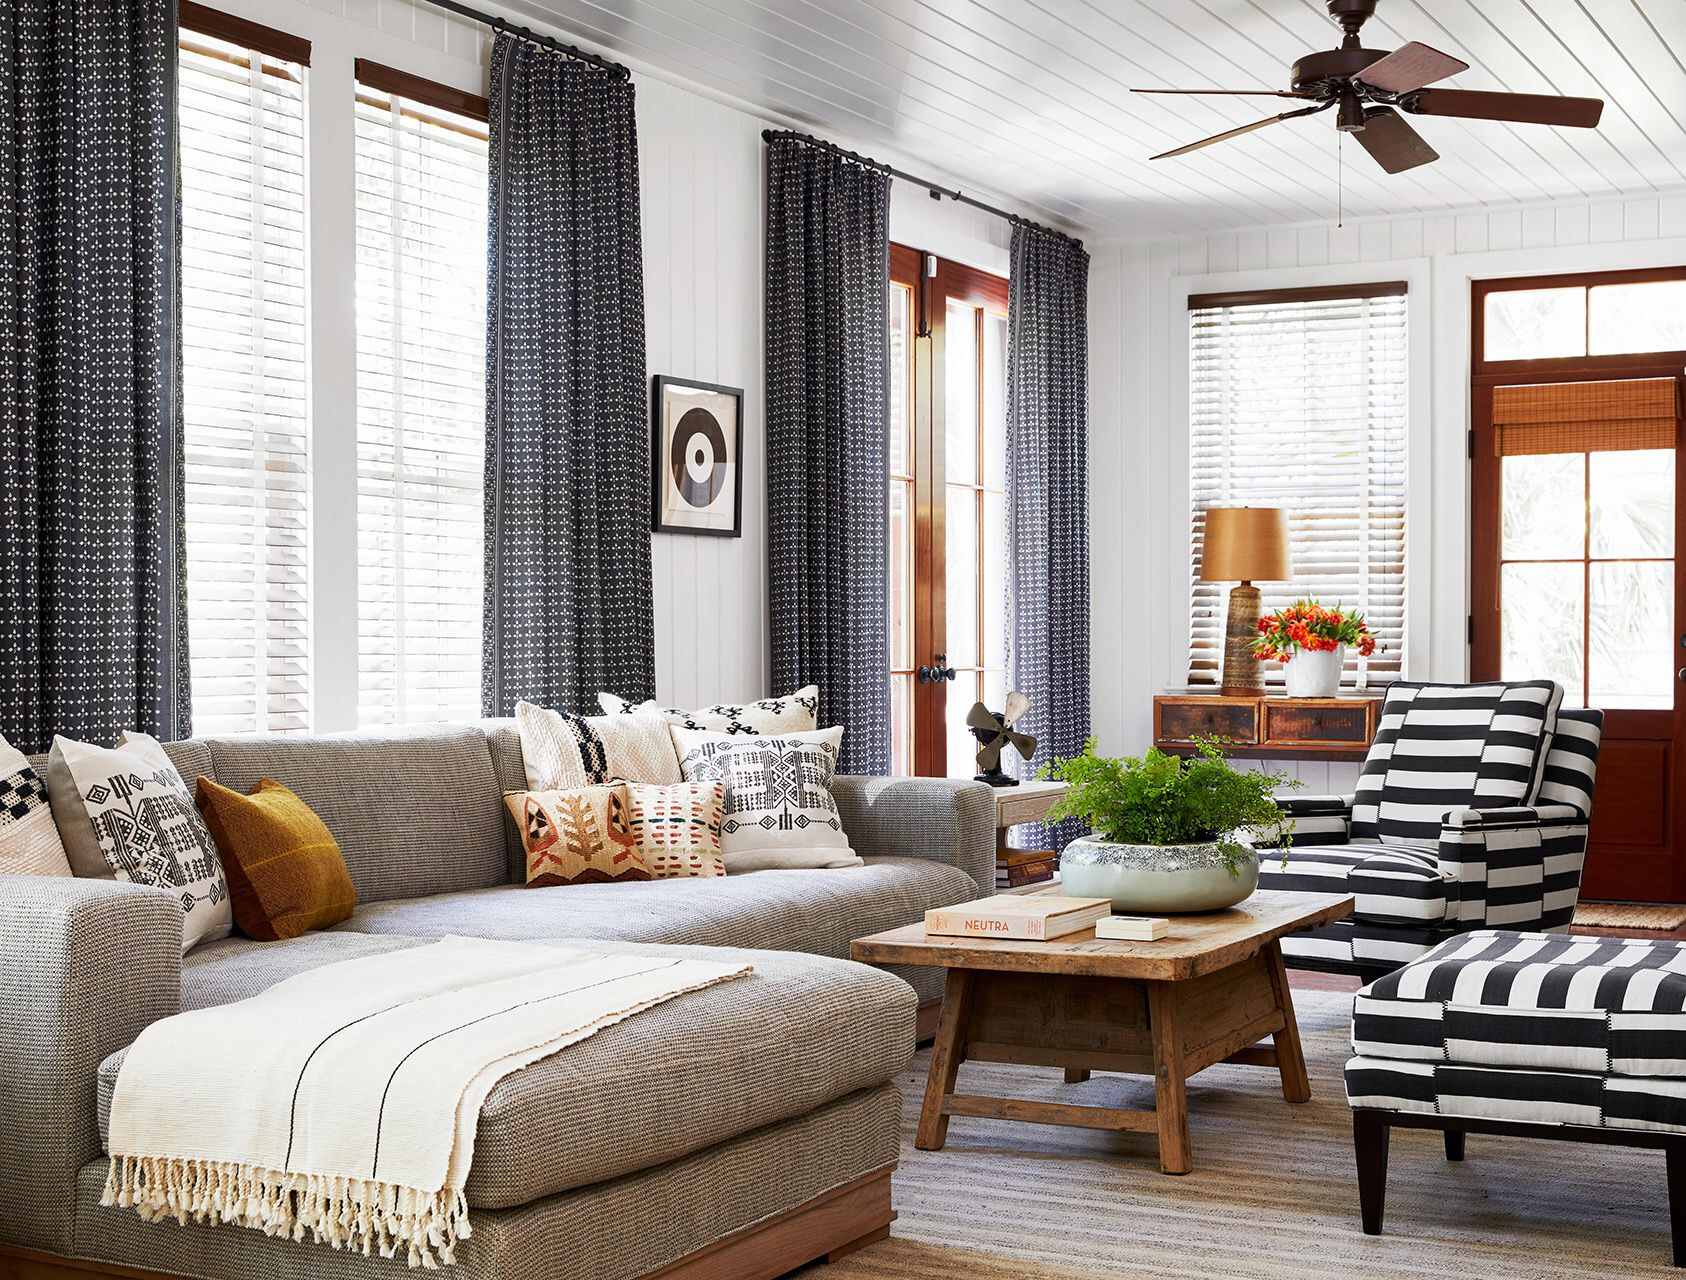 What Ceiling Fan Size Is Best For A Living Room